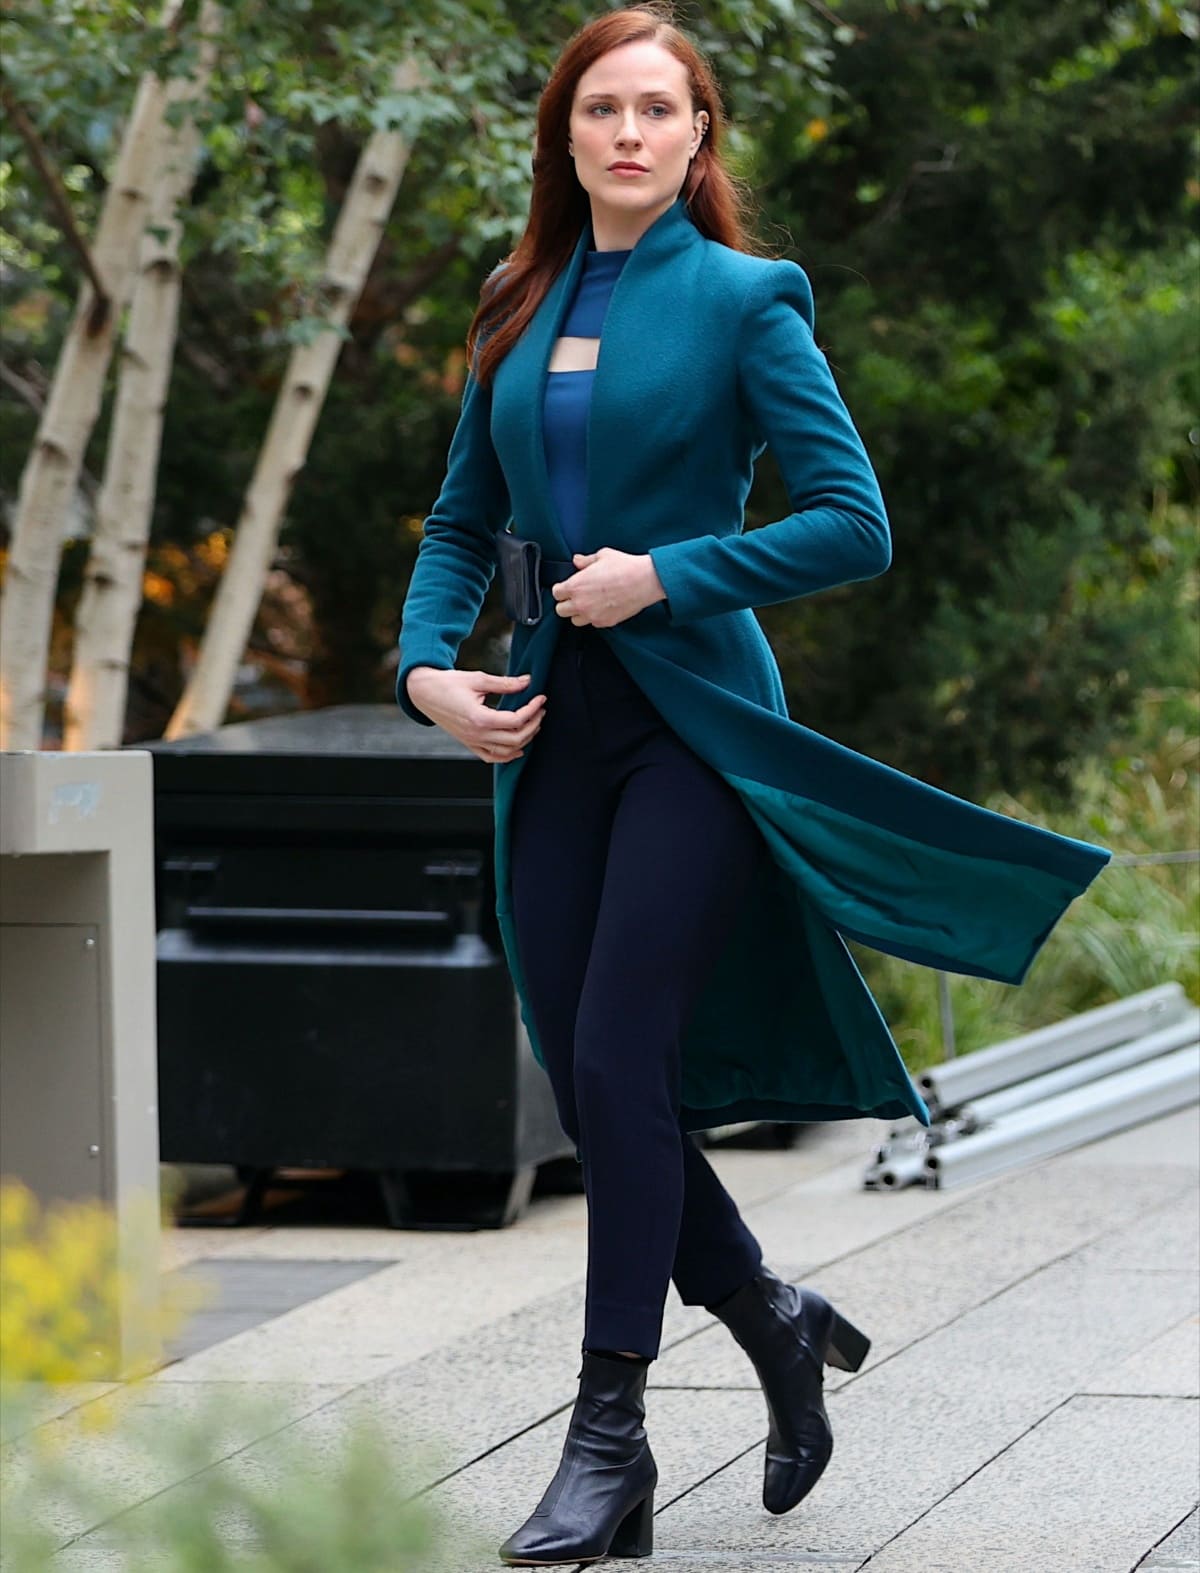 Evan Rachel Wood wearing a structured green coat and black leather boots while filming Westworld in Manhattan